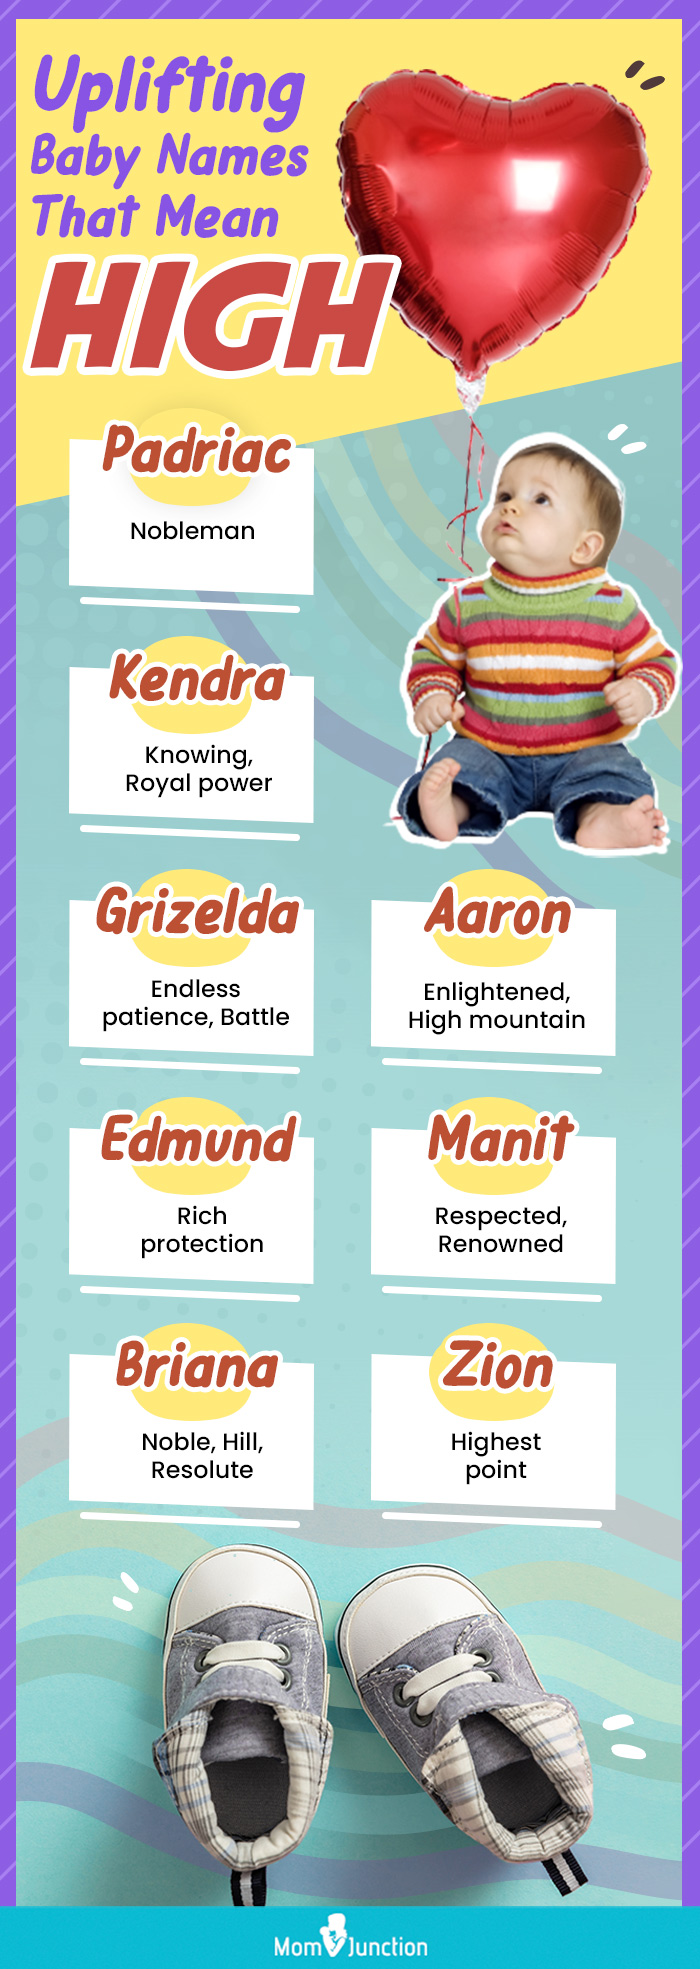 uplifting baby names that mean high(infographic)